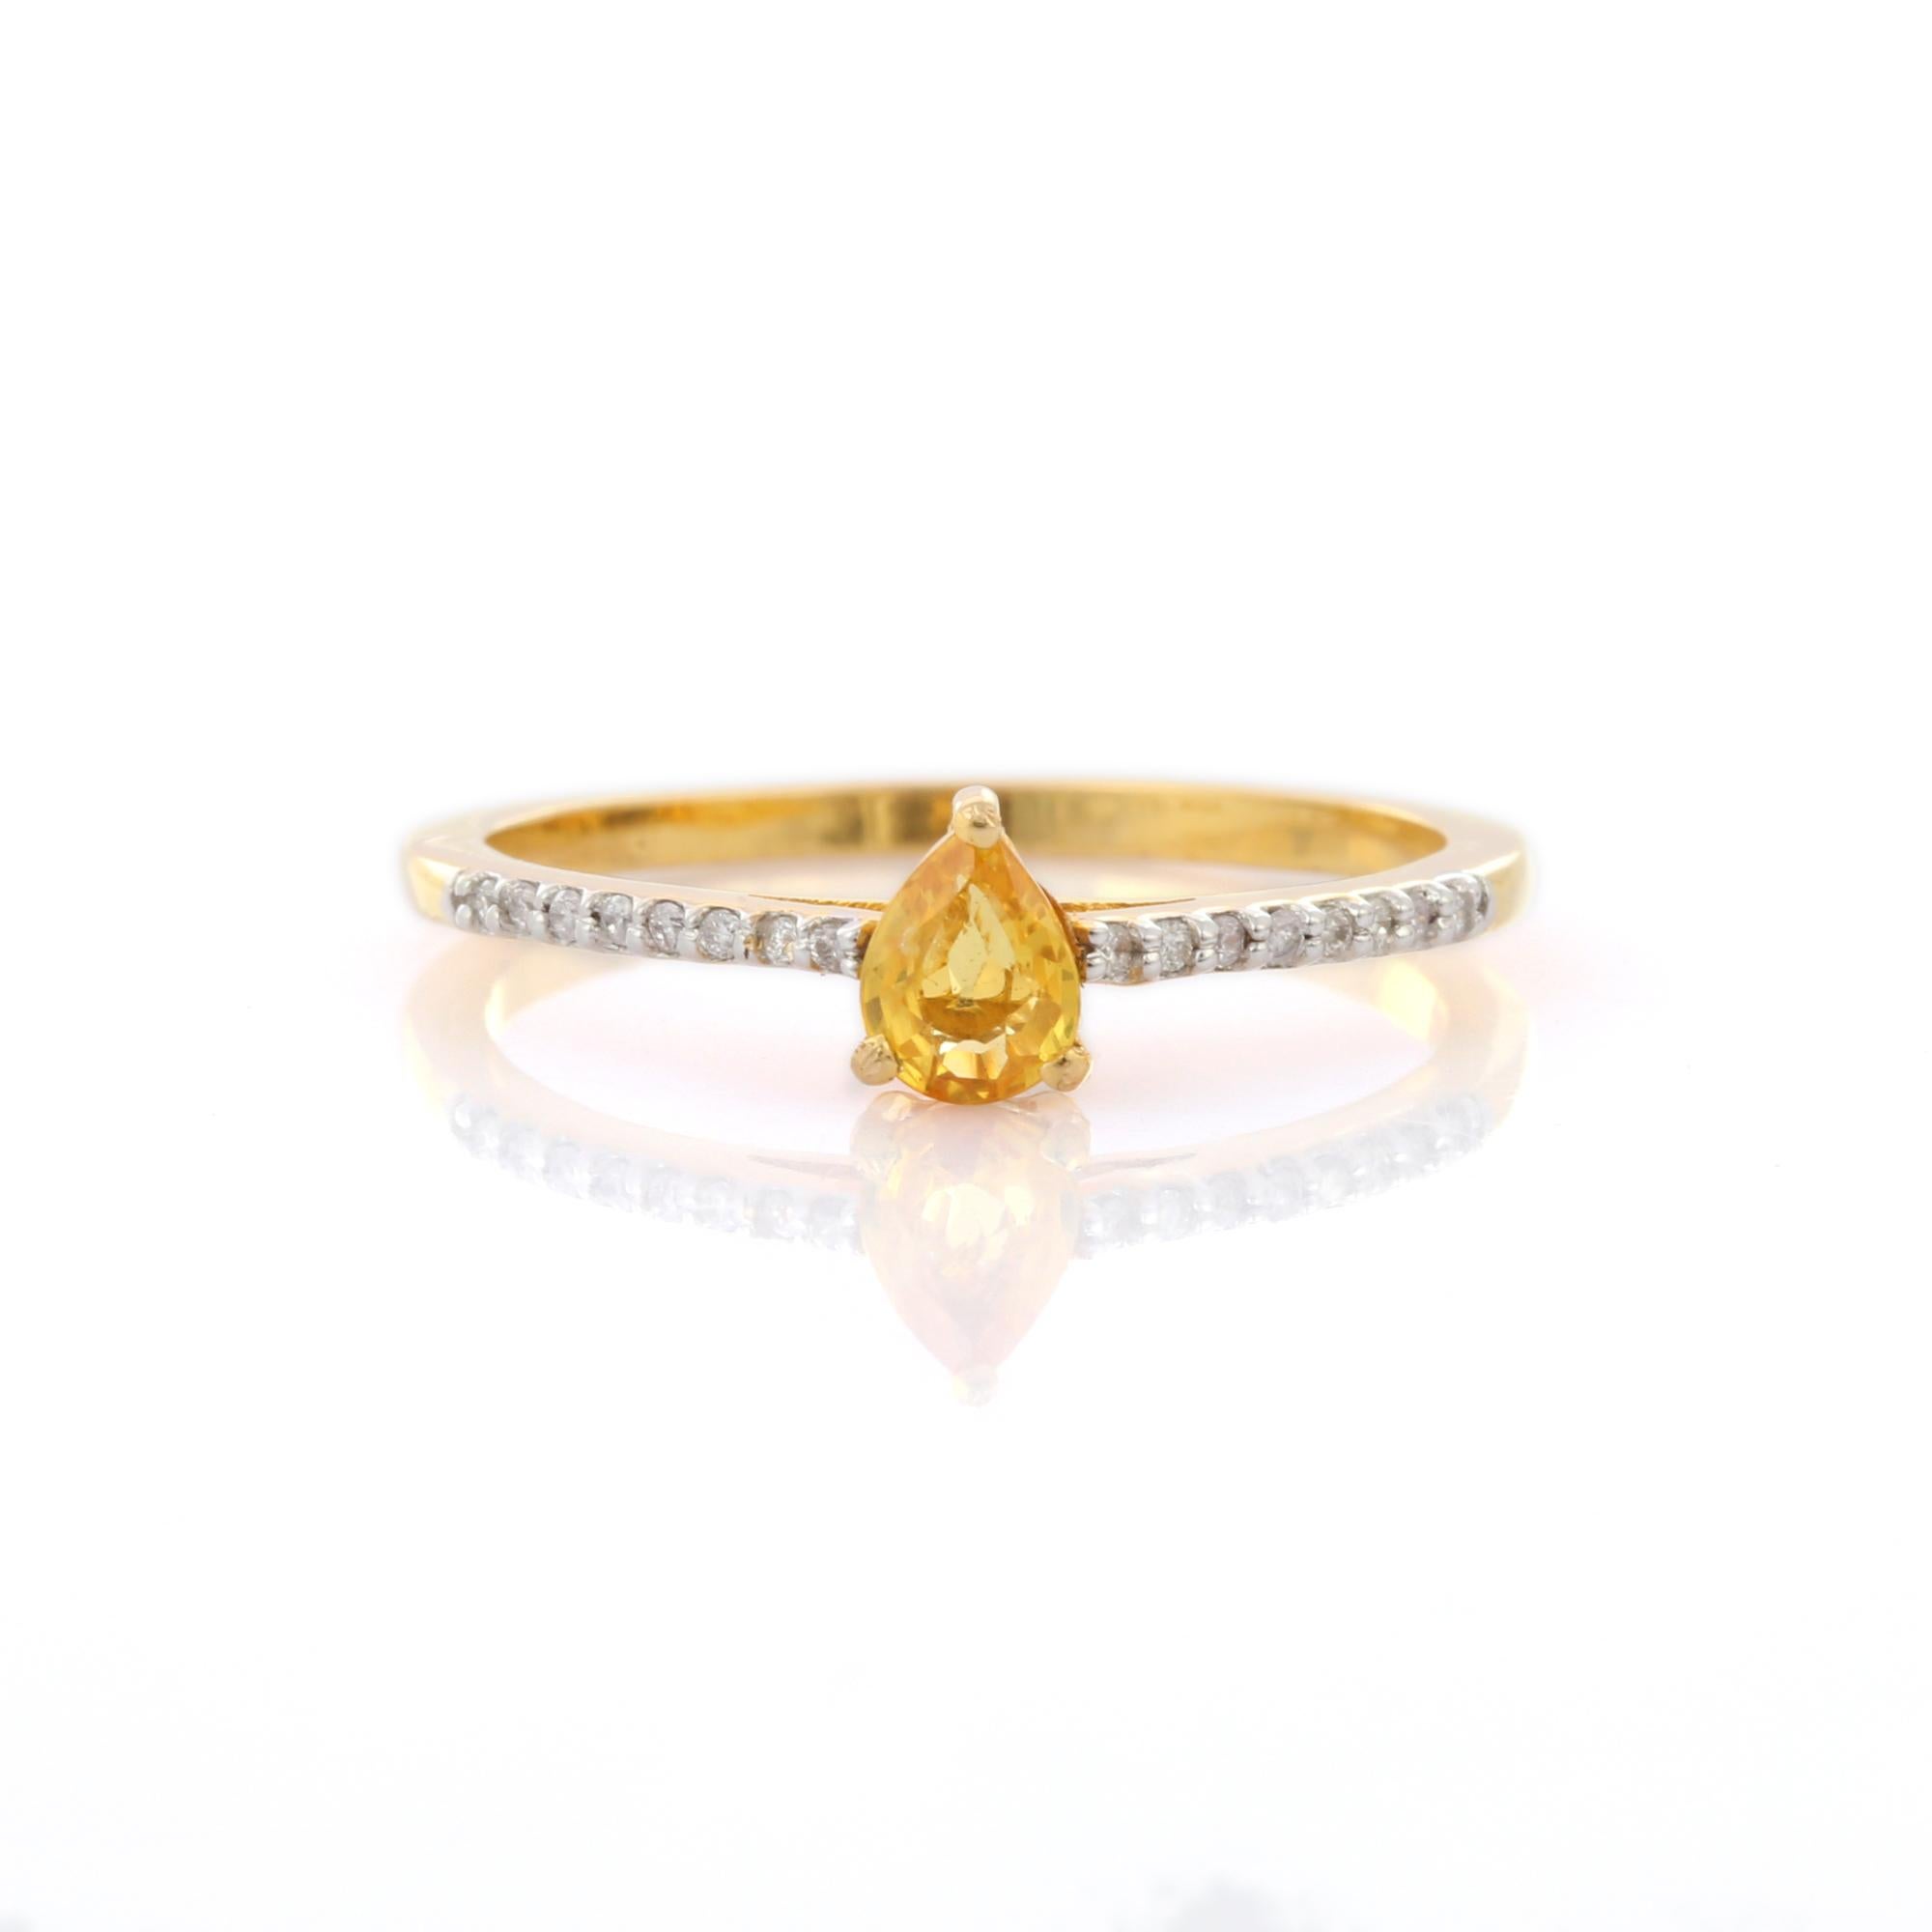 For Sale:  Pear Cut Yellow Sapphire and Diamond Statement Ring in 14K Yellow Gold   9